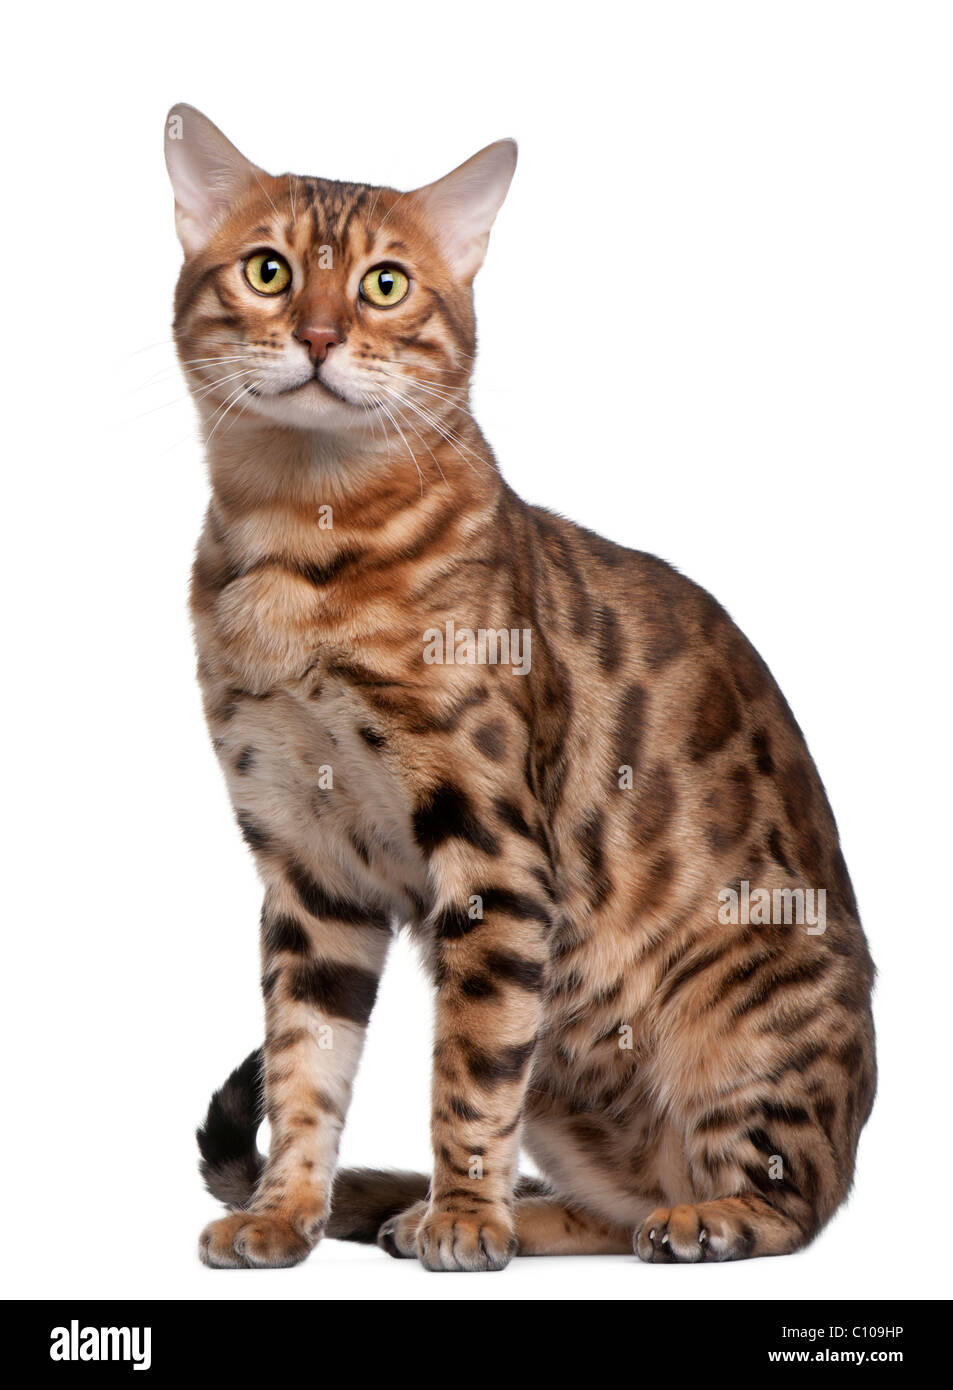 Bengal cat, 18 months old, in front of white background Stock Photo